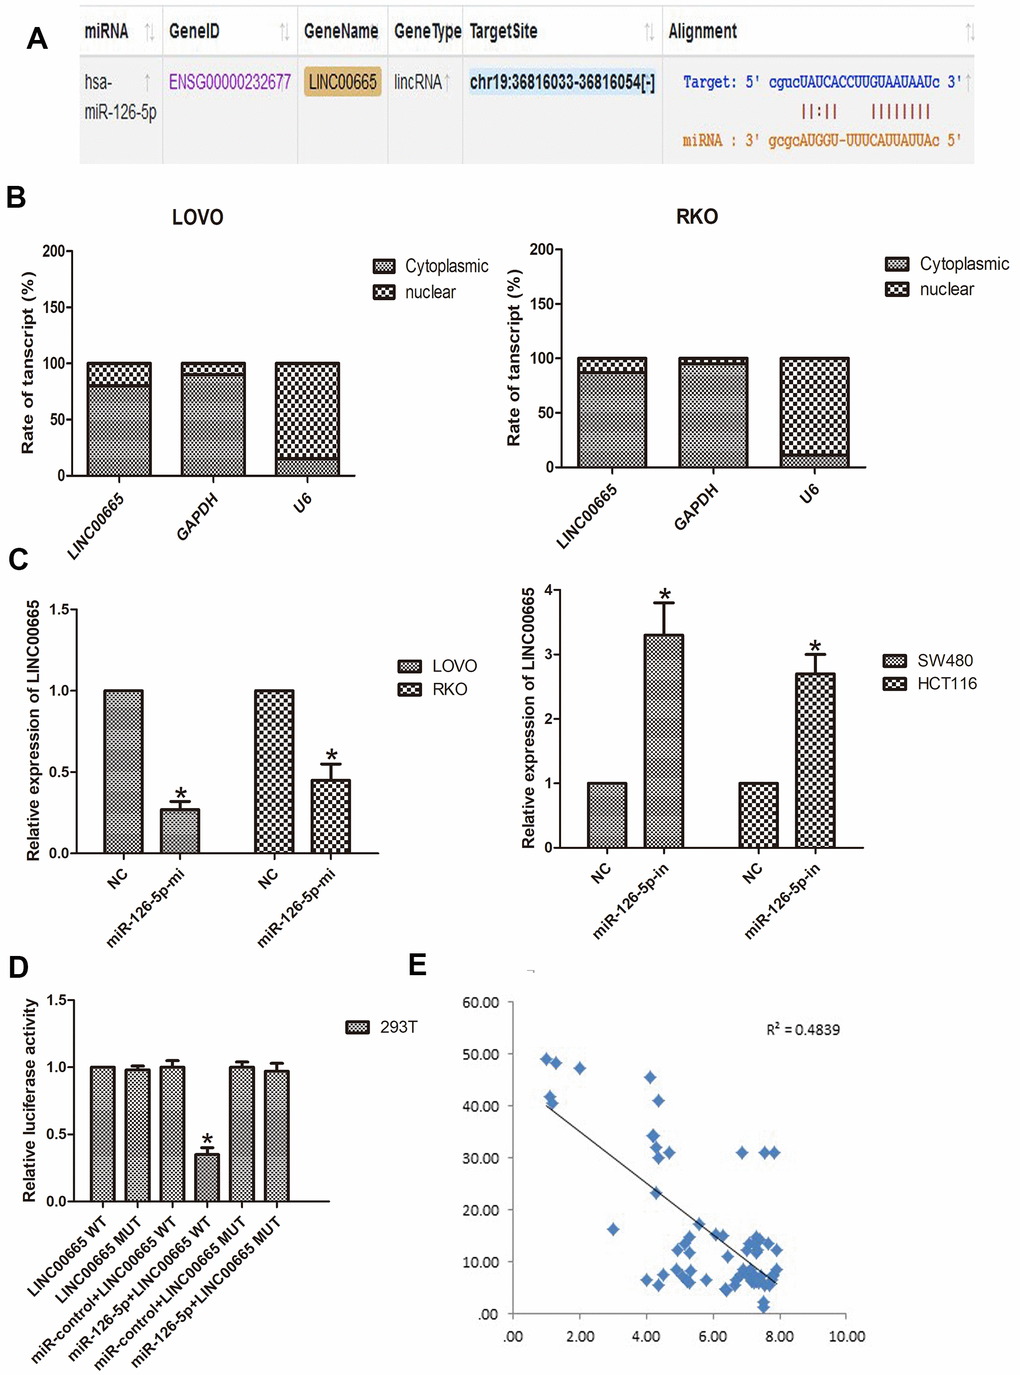 LINC00665 is a direct target of miR-126-5p and is inversely related to miR-126-5p in CRC. (A) Predicted miR-126-5p binding sites in the LINC00665 sequence. (B) Subcellular fractionation and qPCR analysis confirmed that LINC00665 was largely enriched in the cytoplasm of cells. (C) qPCR showed LINC00665 expression in cells transfected with a miR-126-5p inhibitor or mimic (n = 6, *P D) Luciferase reporter assay revealed the binding relationship between LINC00665 and miR-126-5p (n = 6, *P E) miR-126-5p mRNA levels were plotted against LINC00665 expression in CRC specimens, demonstrating a significant negative correlation (two-tailed Pearson’s correlation, r = 0.4839; P 